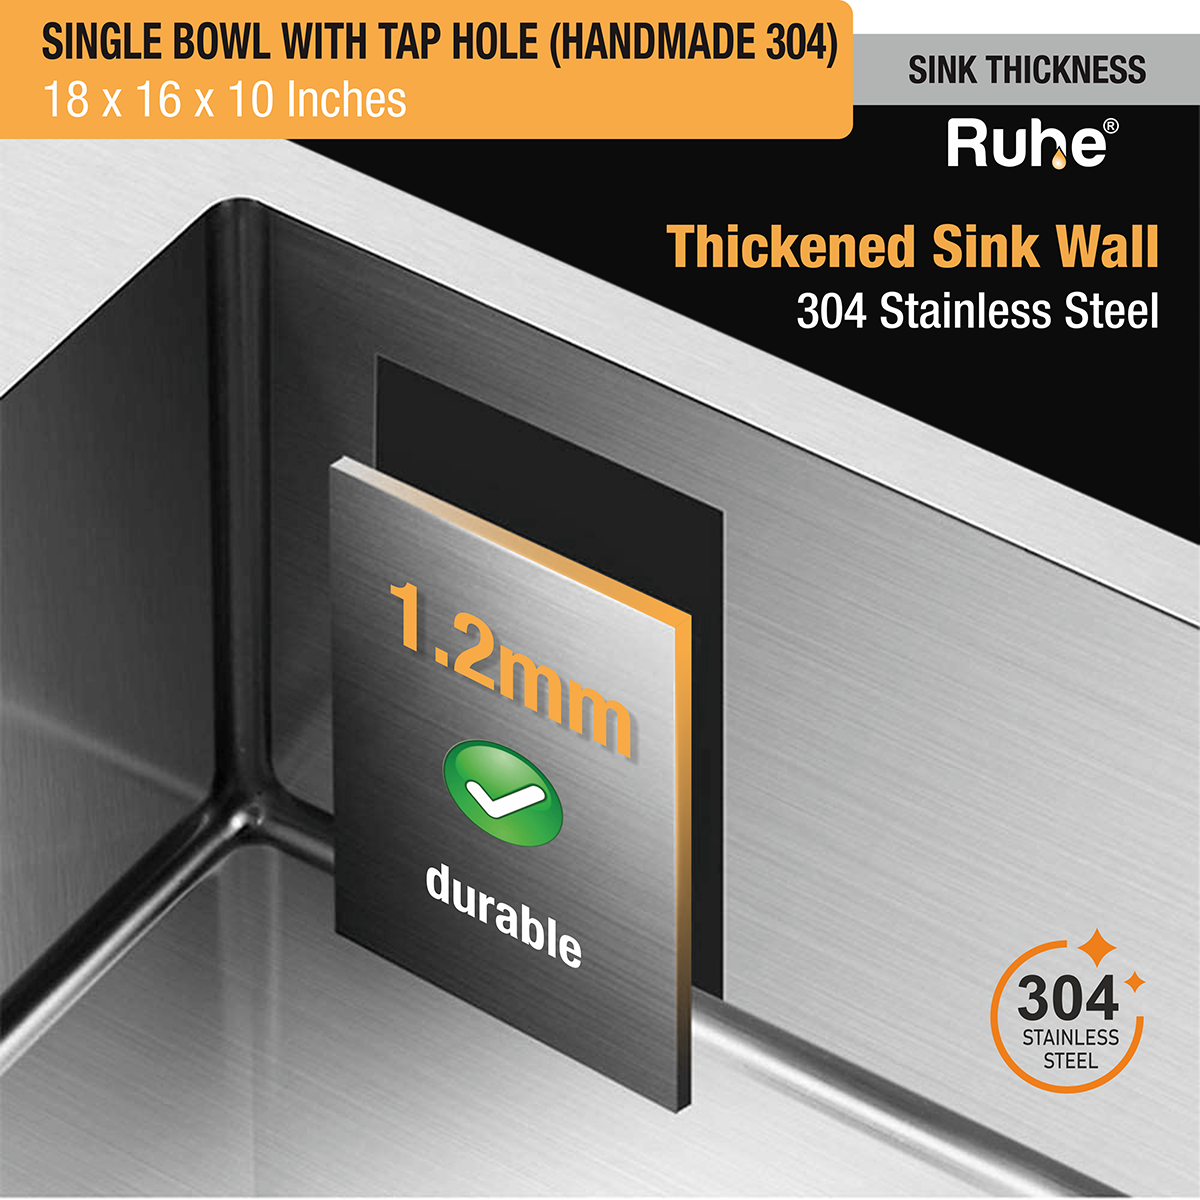 Handmade Single Bowl 304-Grade Kitchen Sink (18 x 16 x 10 Inches) with Tap Hole stainless steel thickness